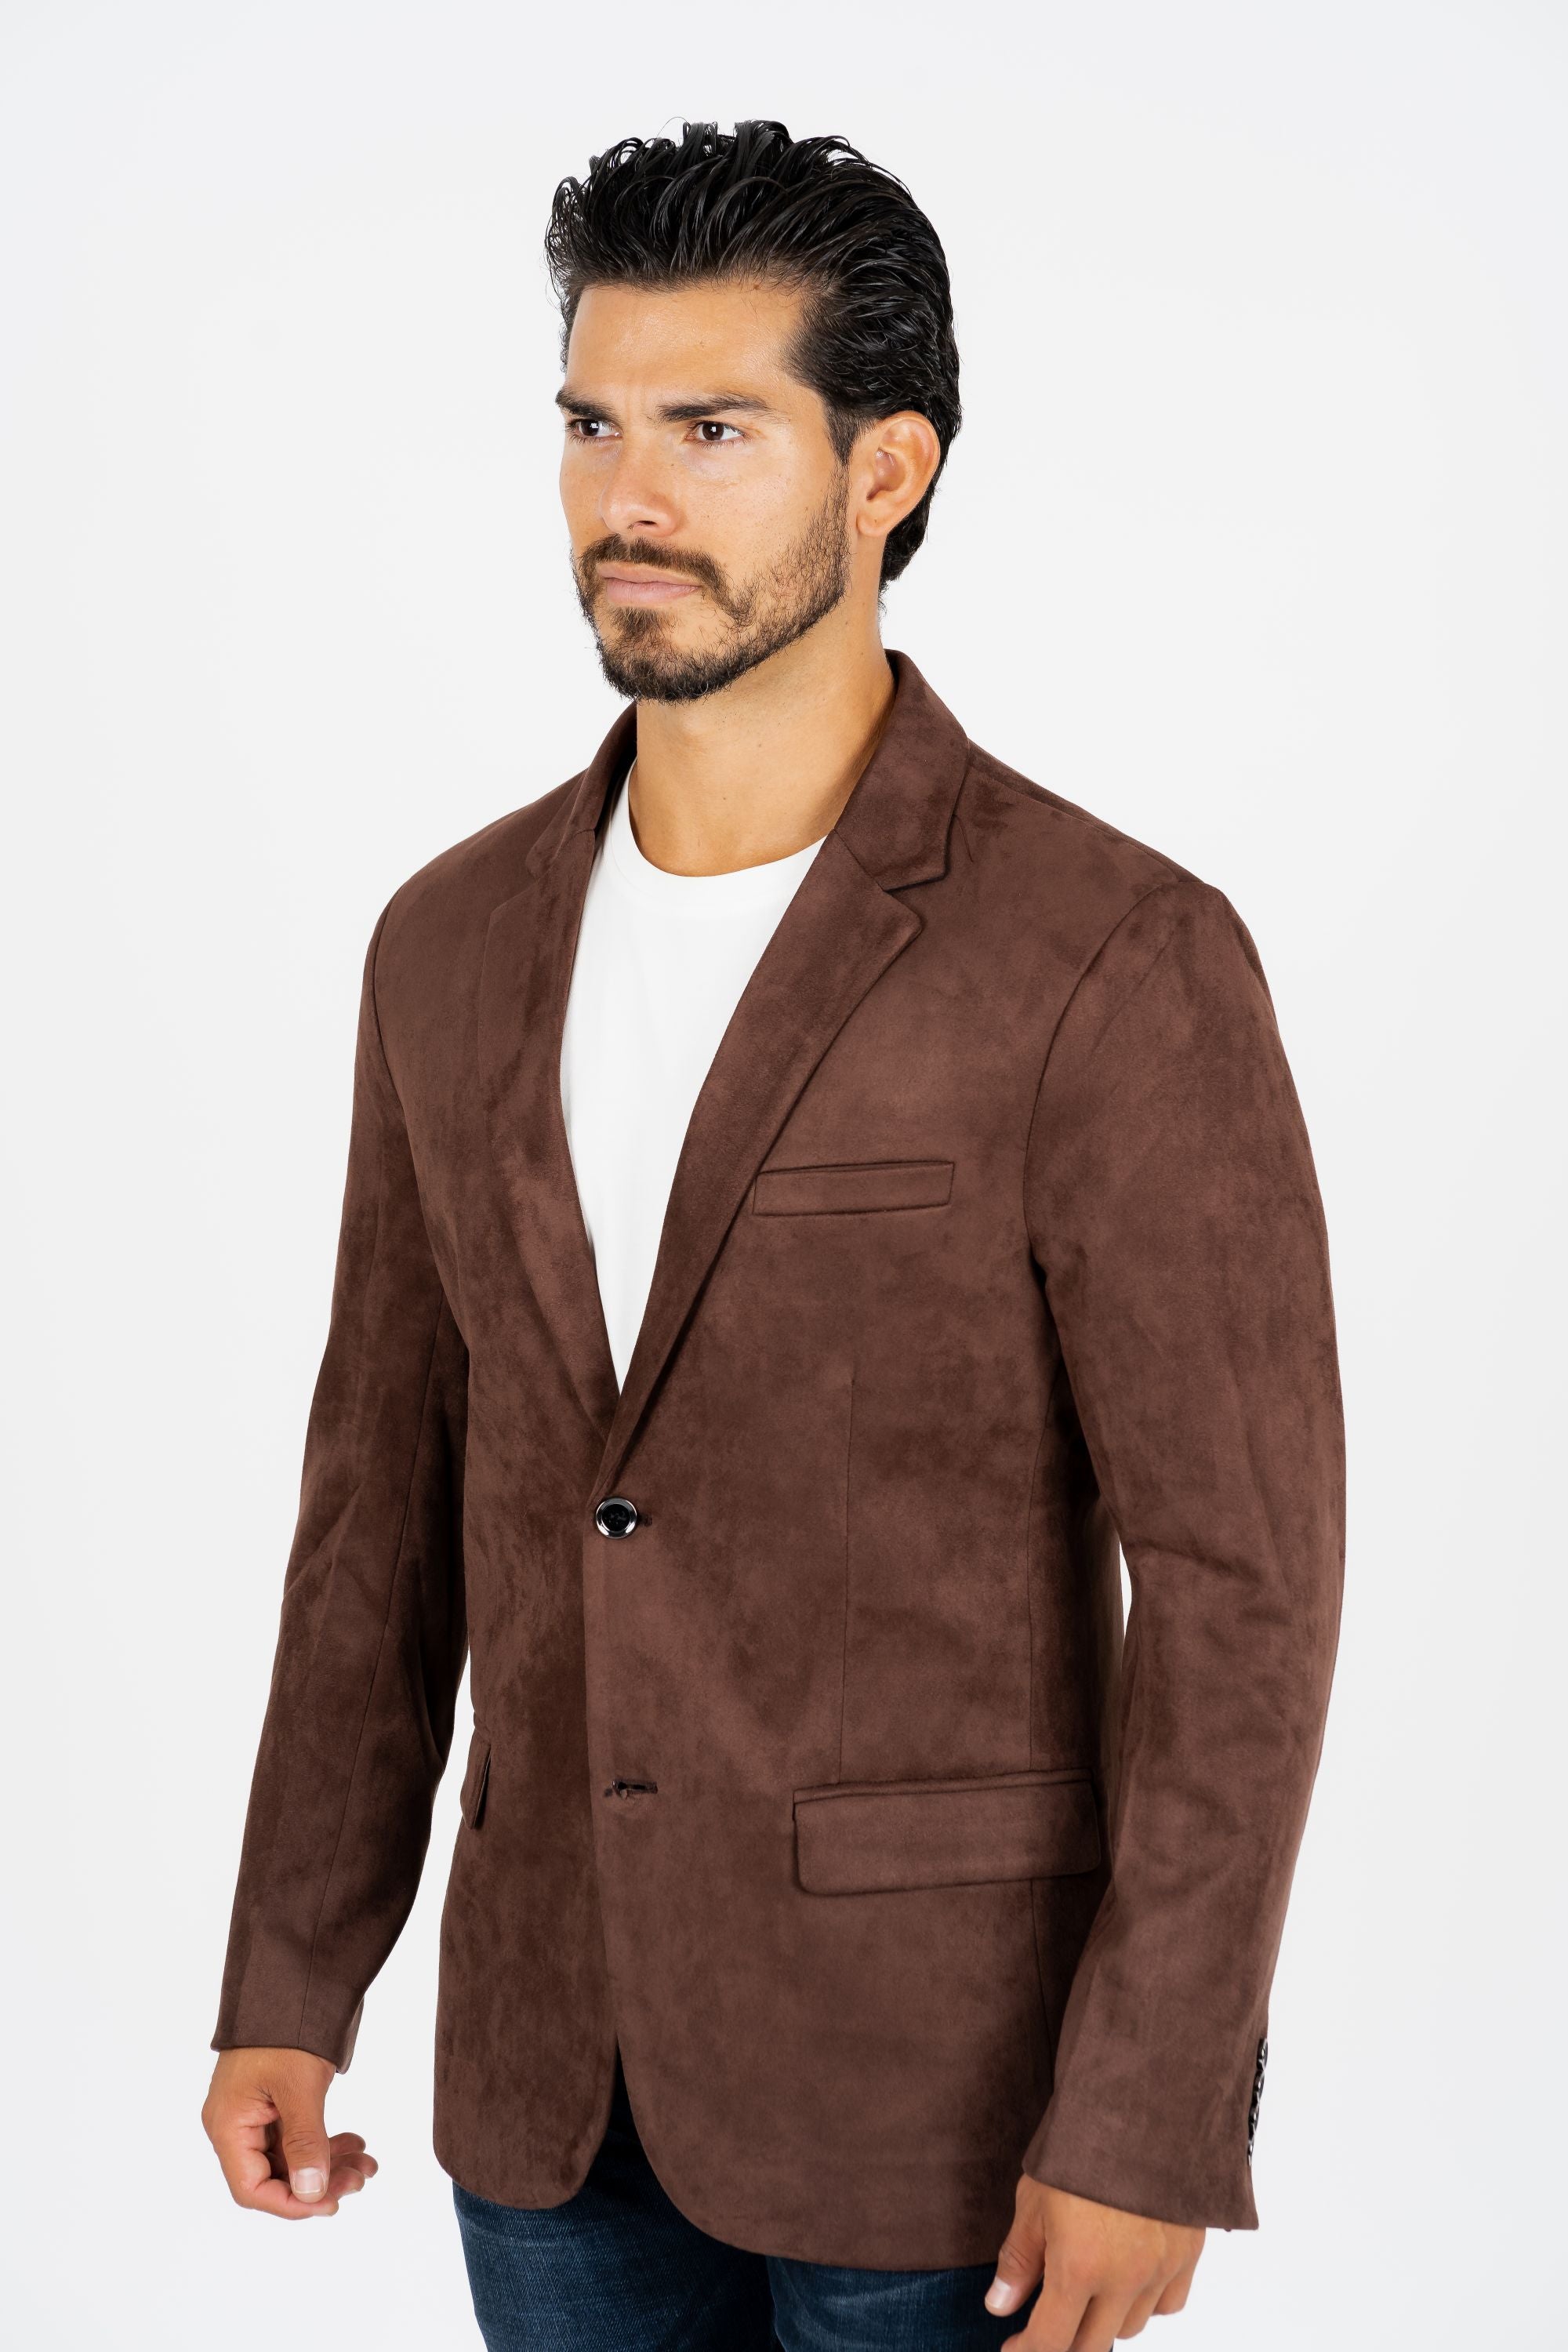 Burgundy Suede Two-Piece Suit - Mr Jay Couture